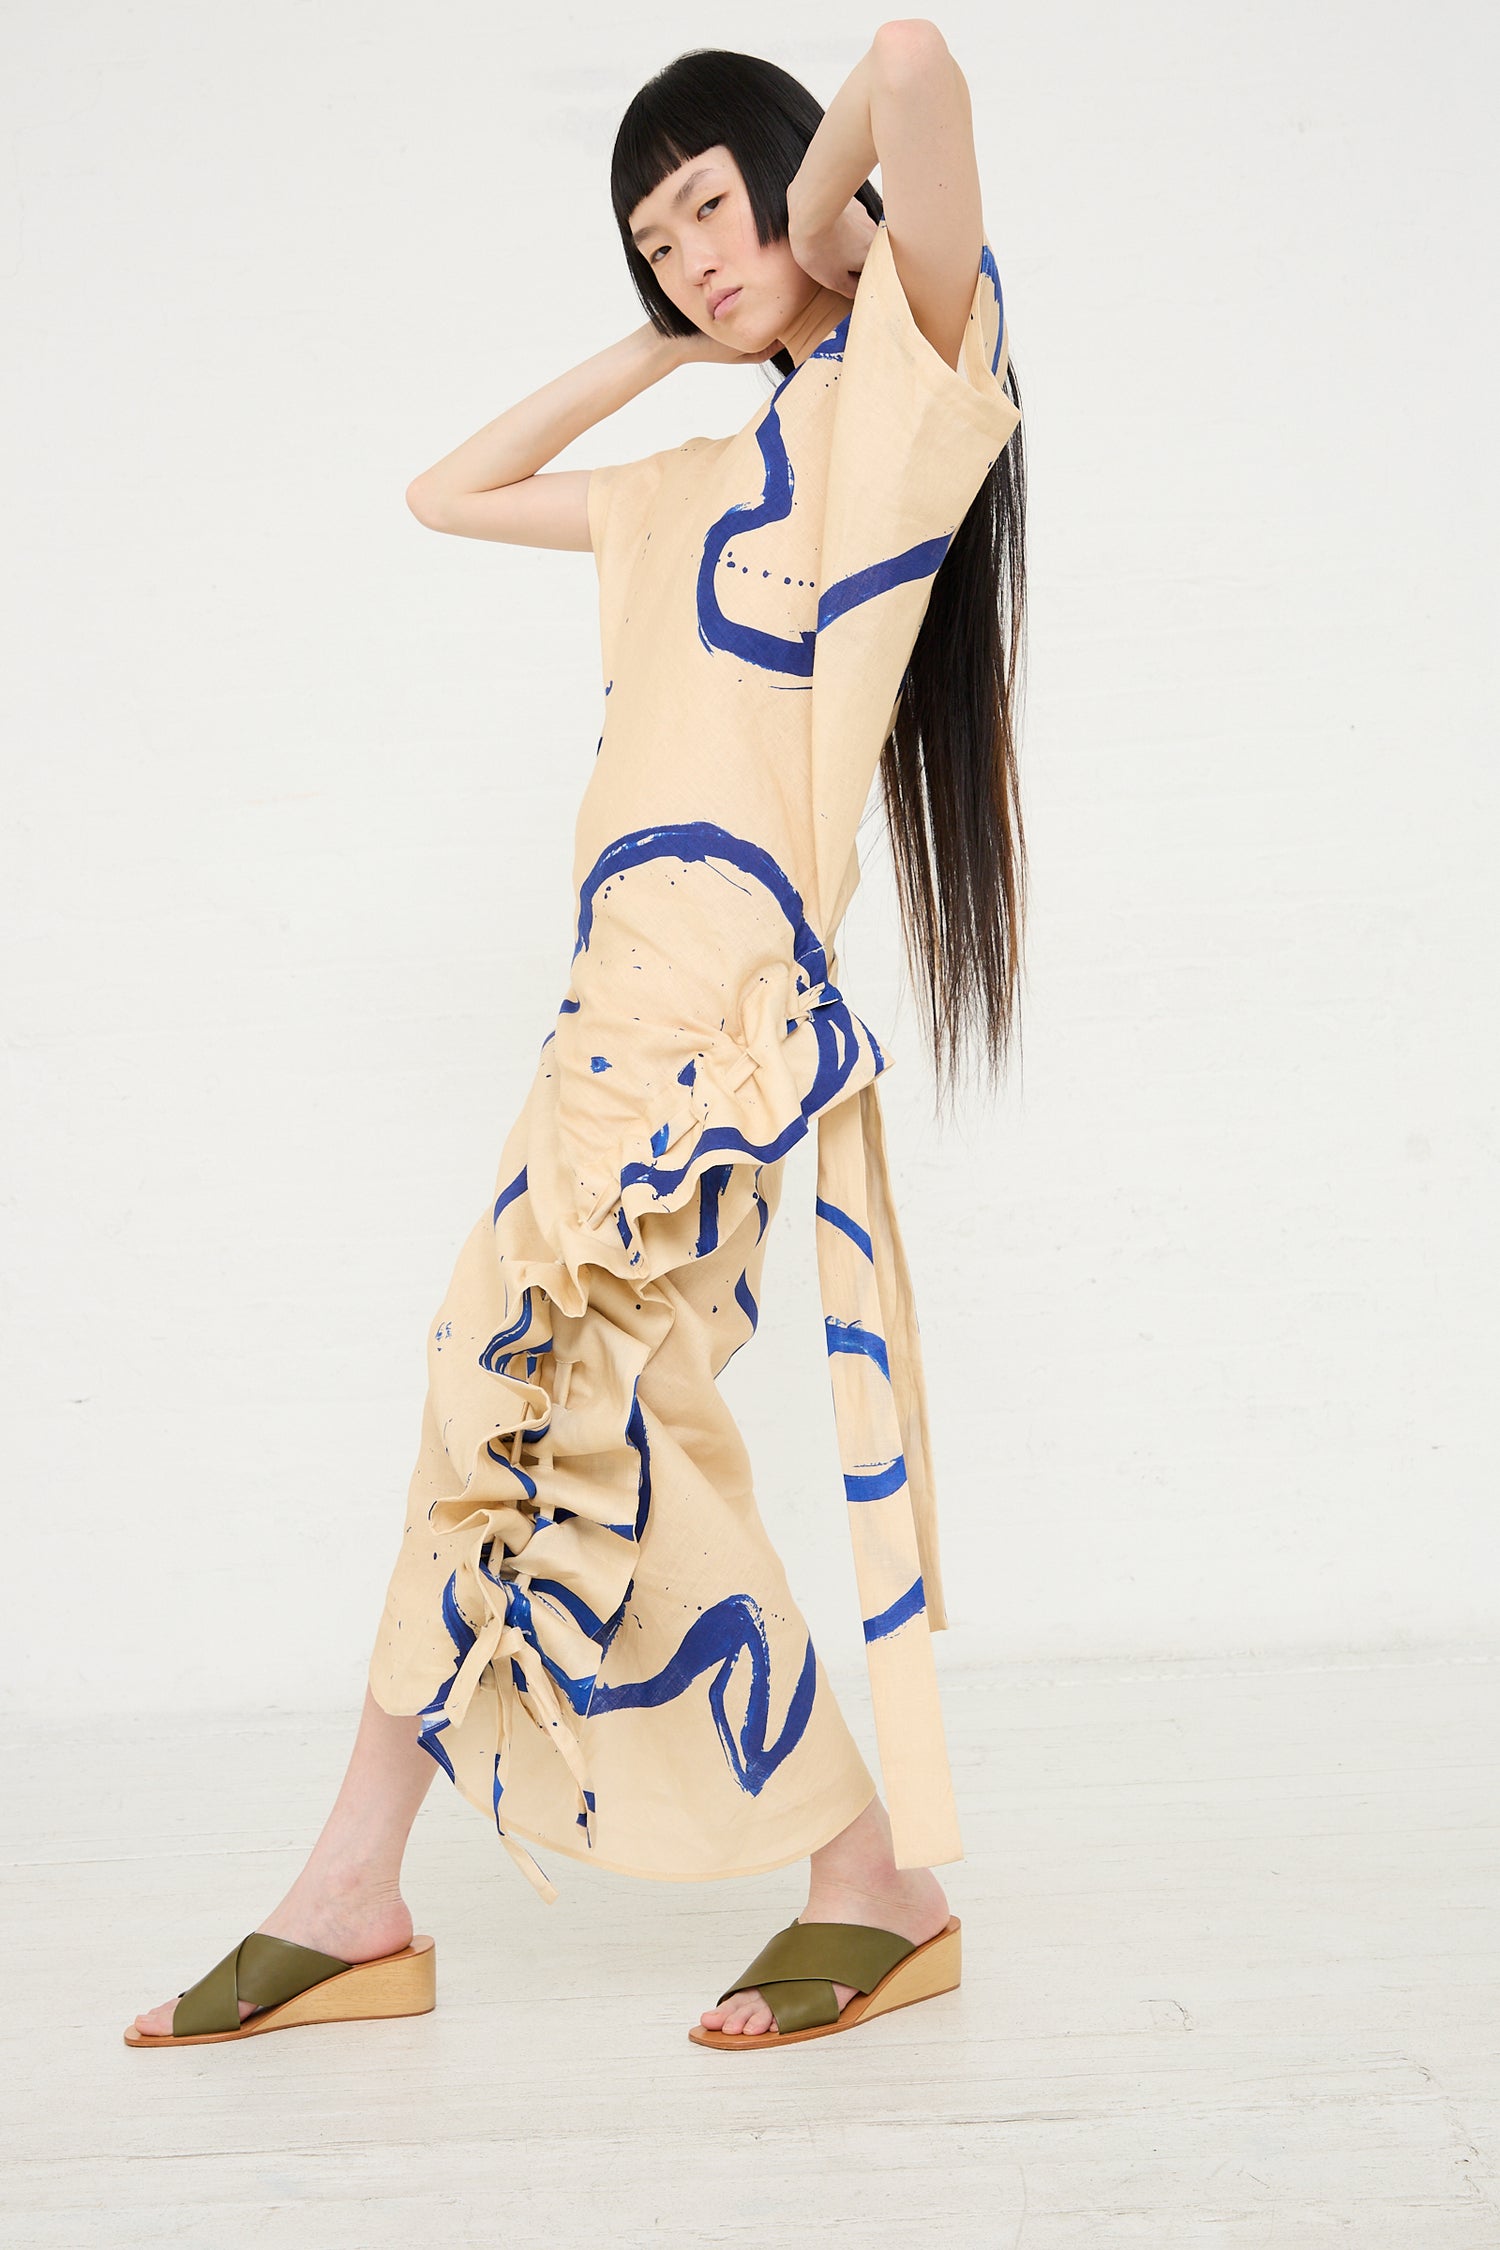 A woman in a unique avant-garde Rachel Comey Regent dress in blush, with abstract printed linen, posing against a white background.